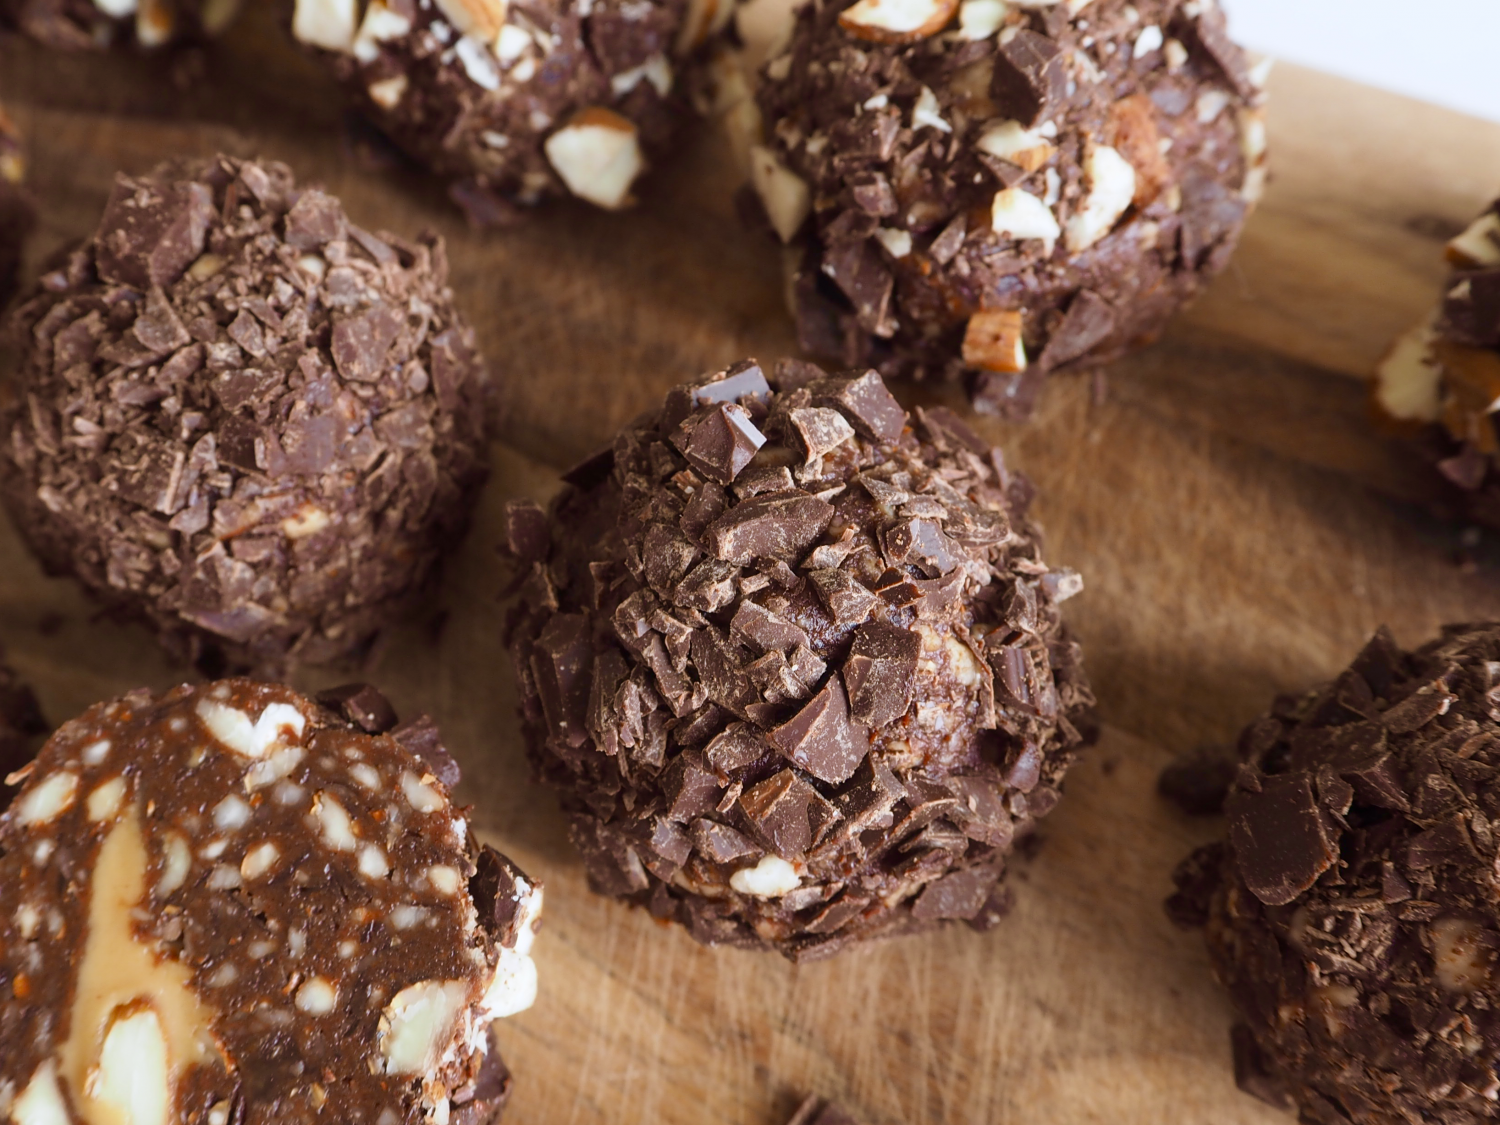 Chocolate bliss balls with a peanut butter and almond core